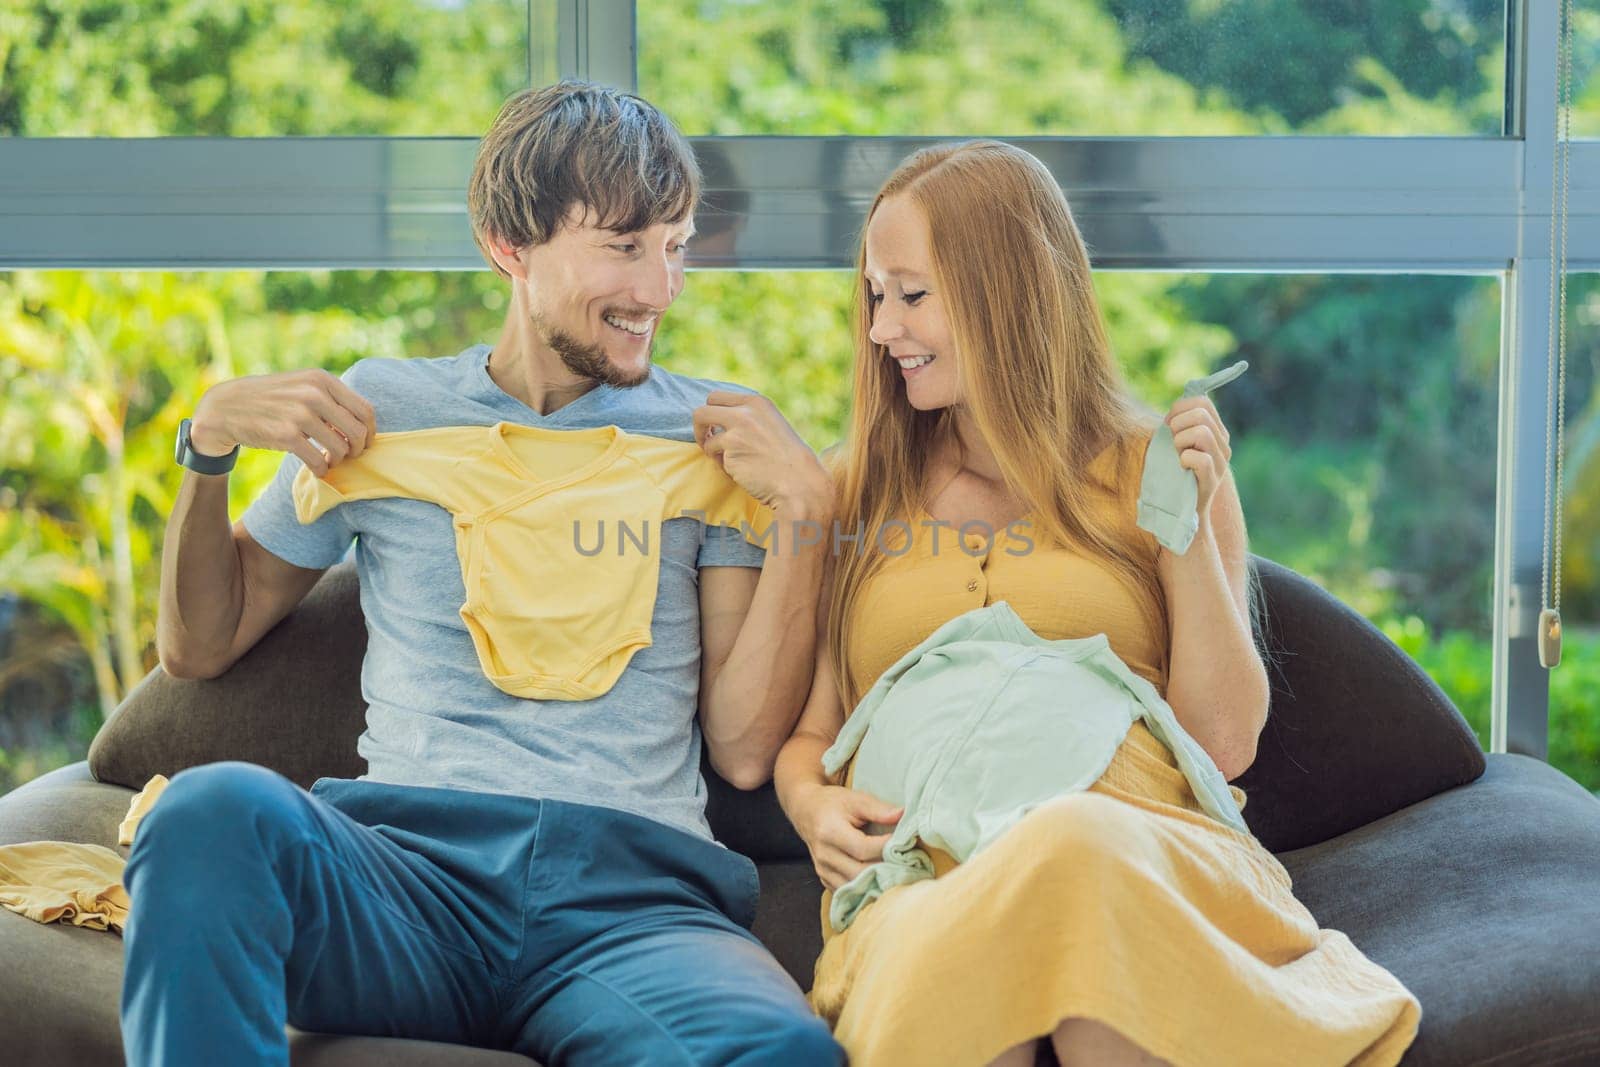 In a heartwarming scene, the future mom and dad hold their unborn baby's clothes in their hands, savoring the joy of anticipation and shared excitement for their little one's arrival by galitskaya